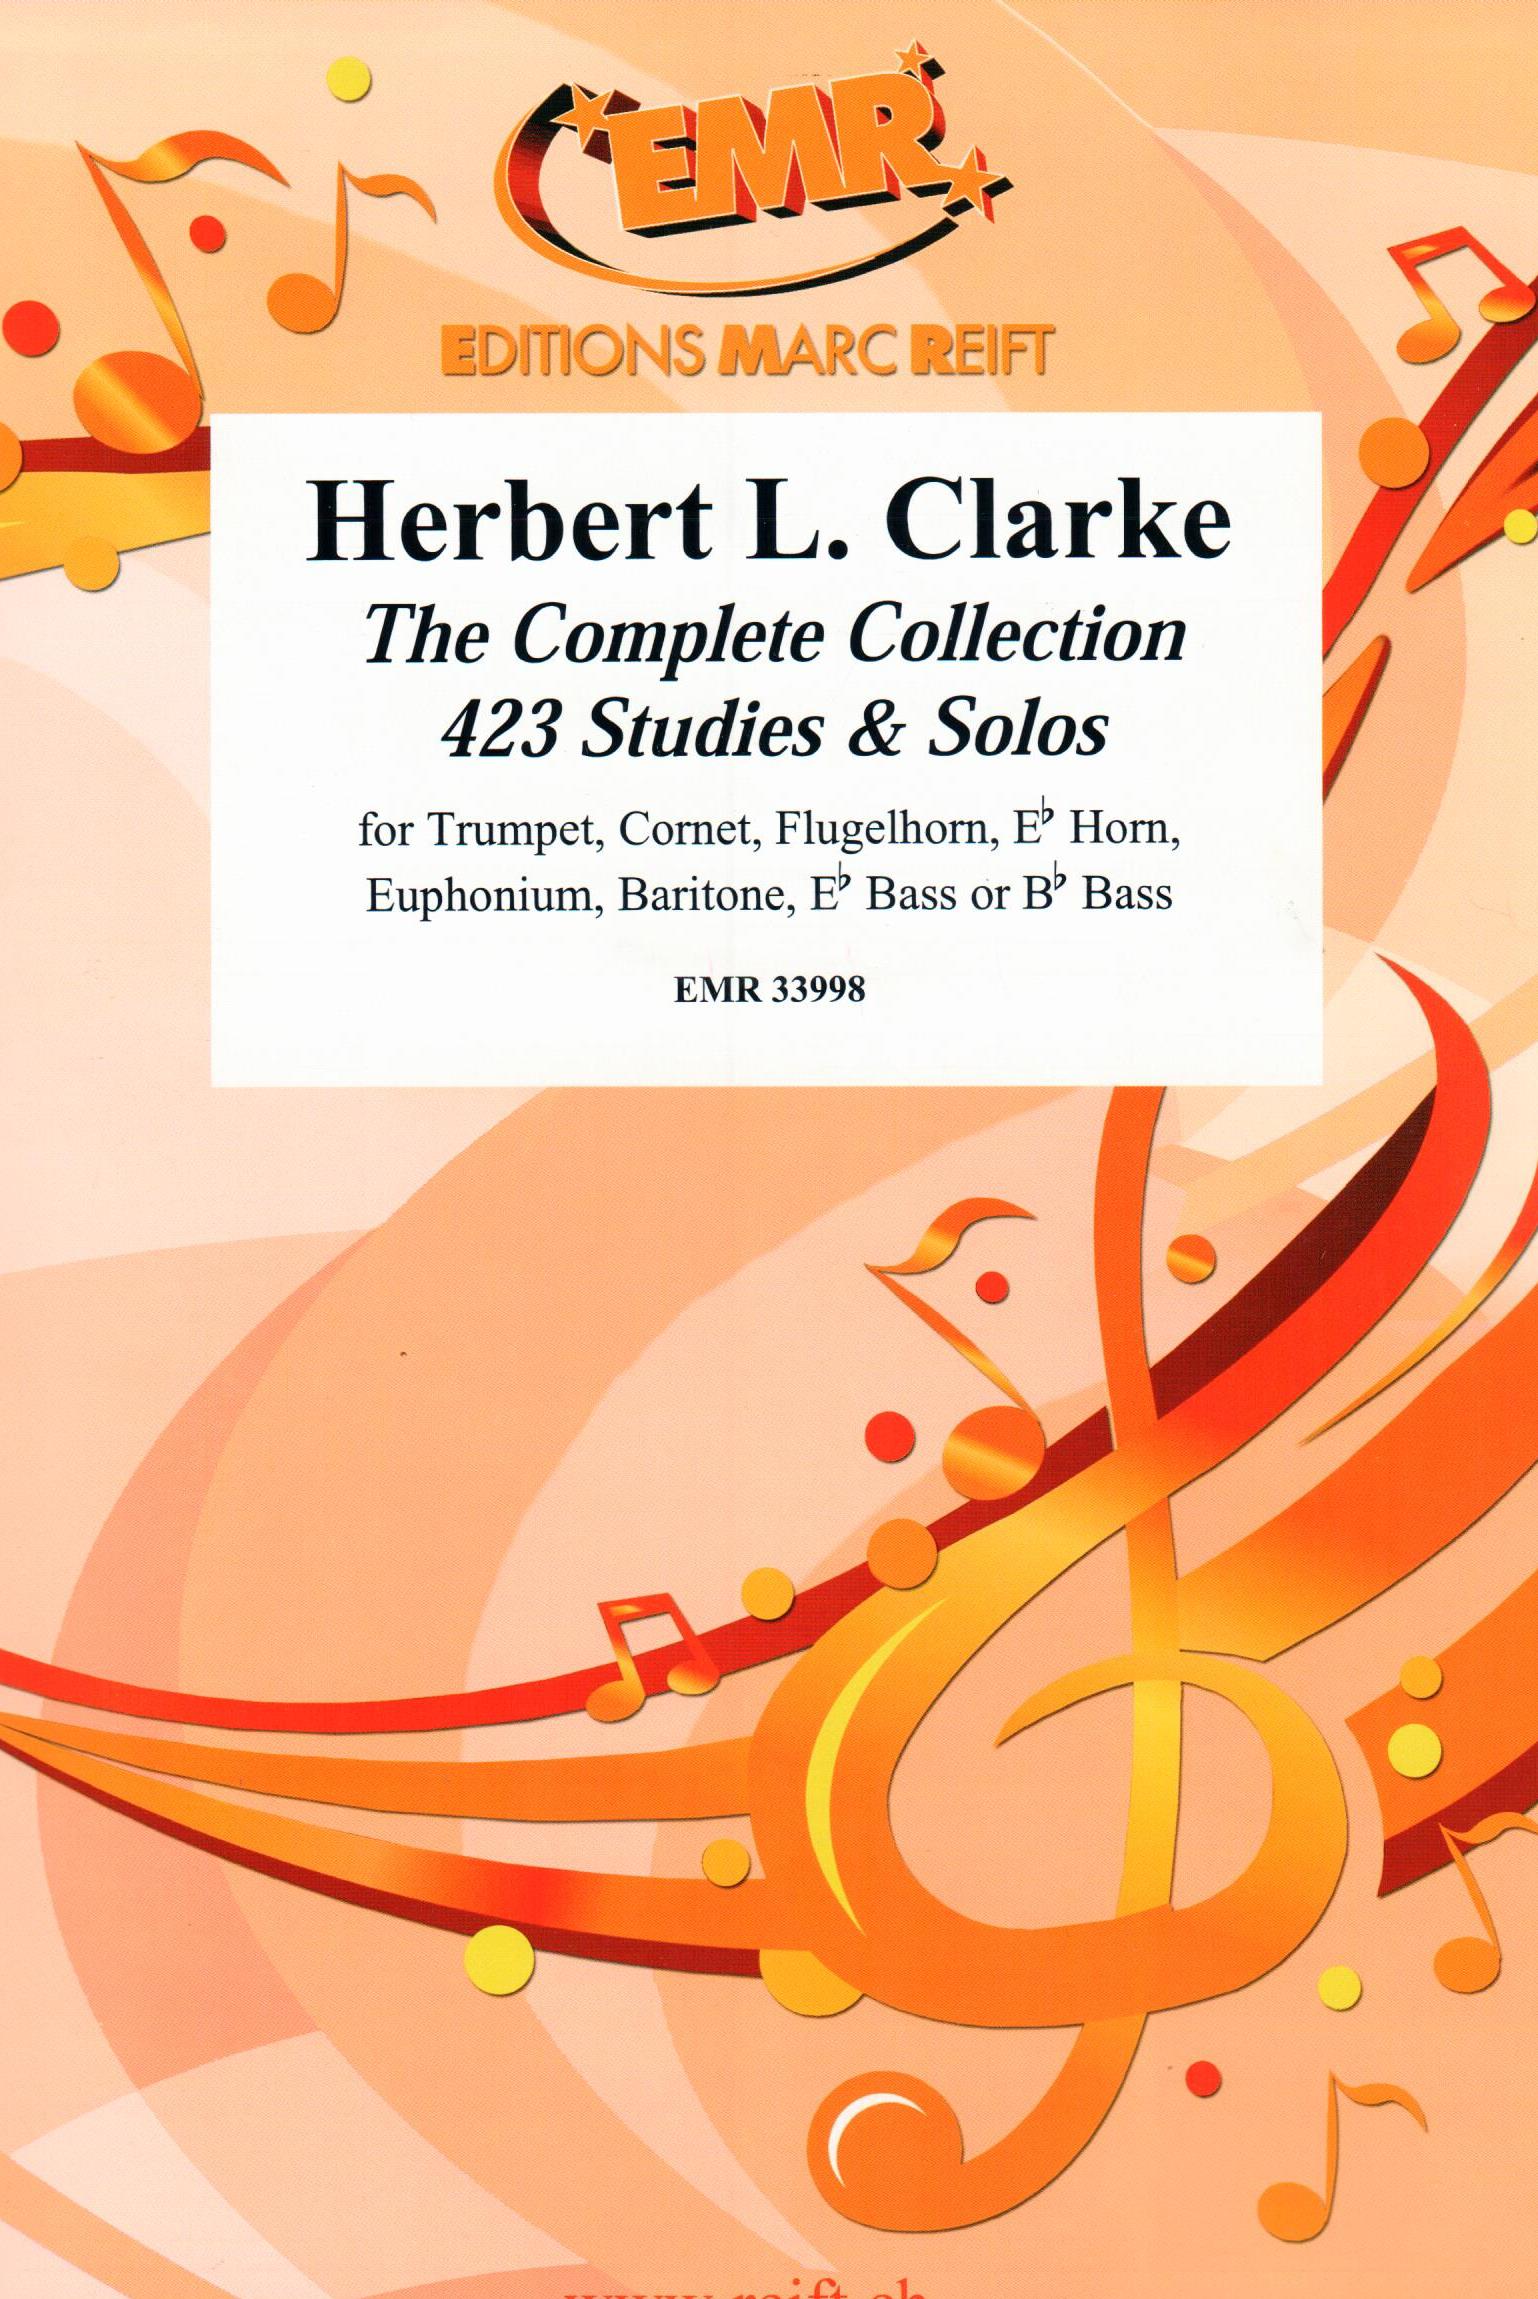 THE COMPLETE COLLECTION 423 STUDIES & SOLOS